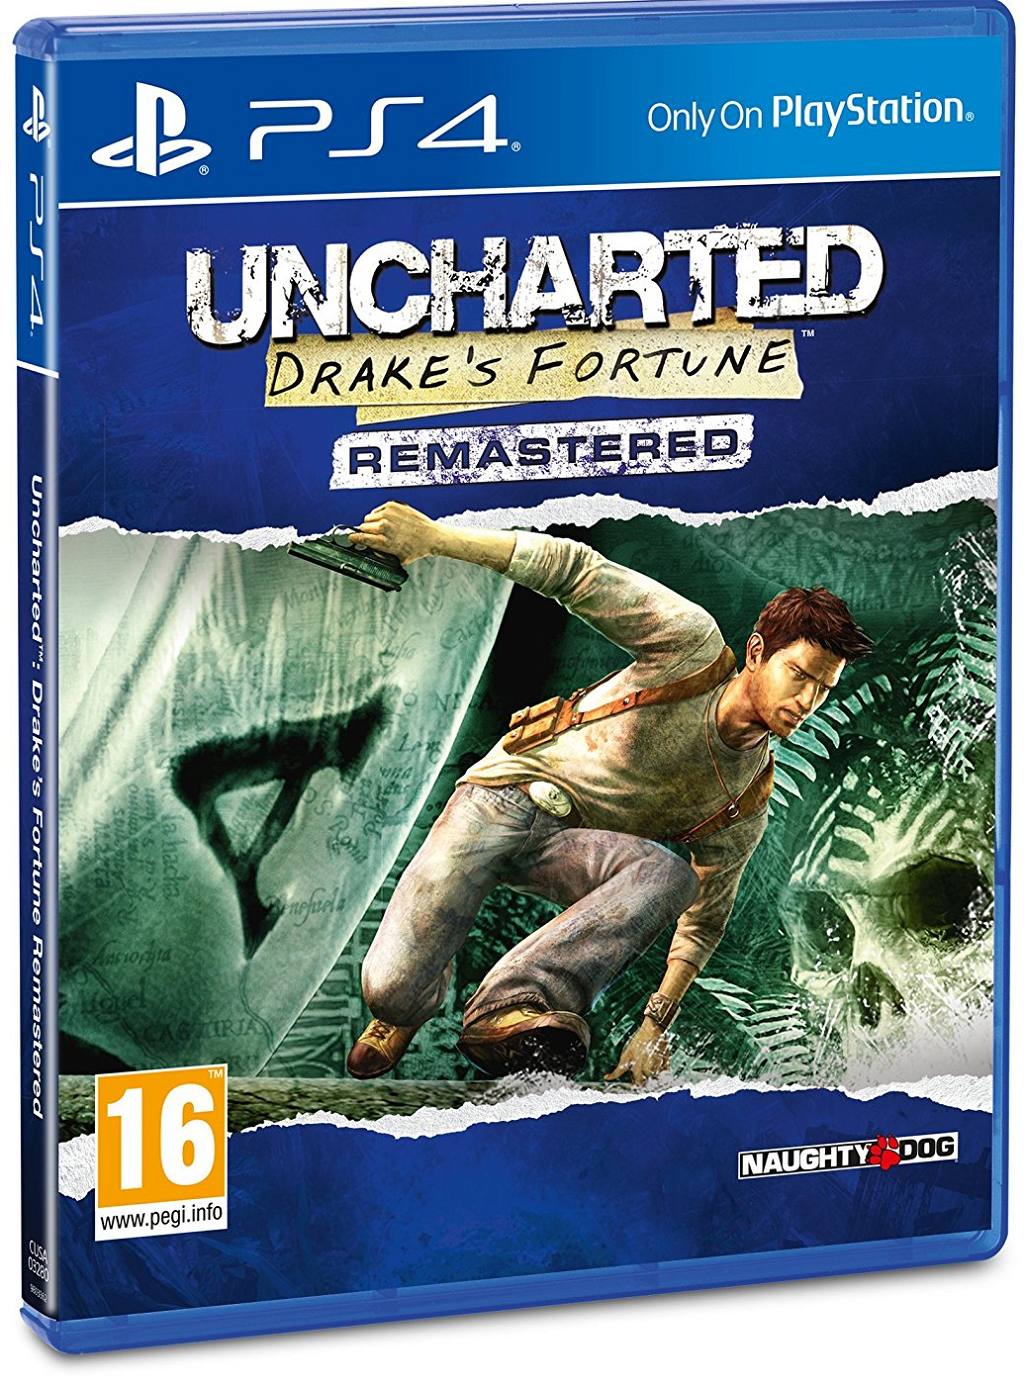 Drake's Remastered for PlayStation 4